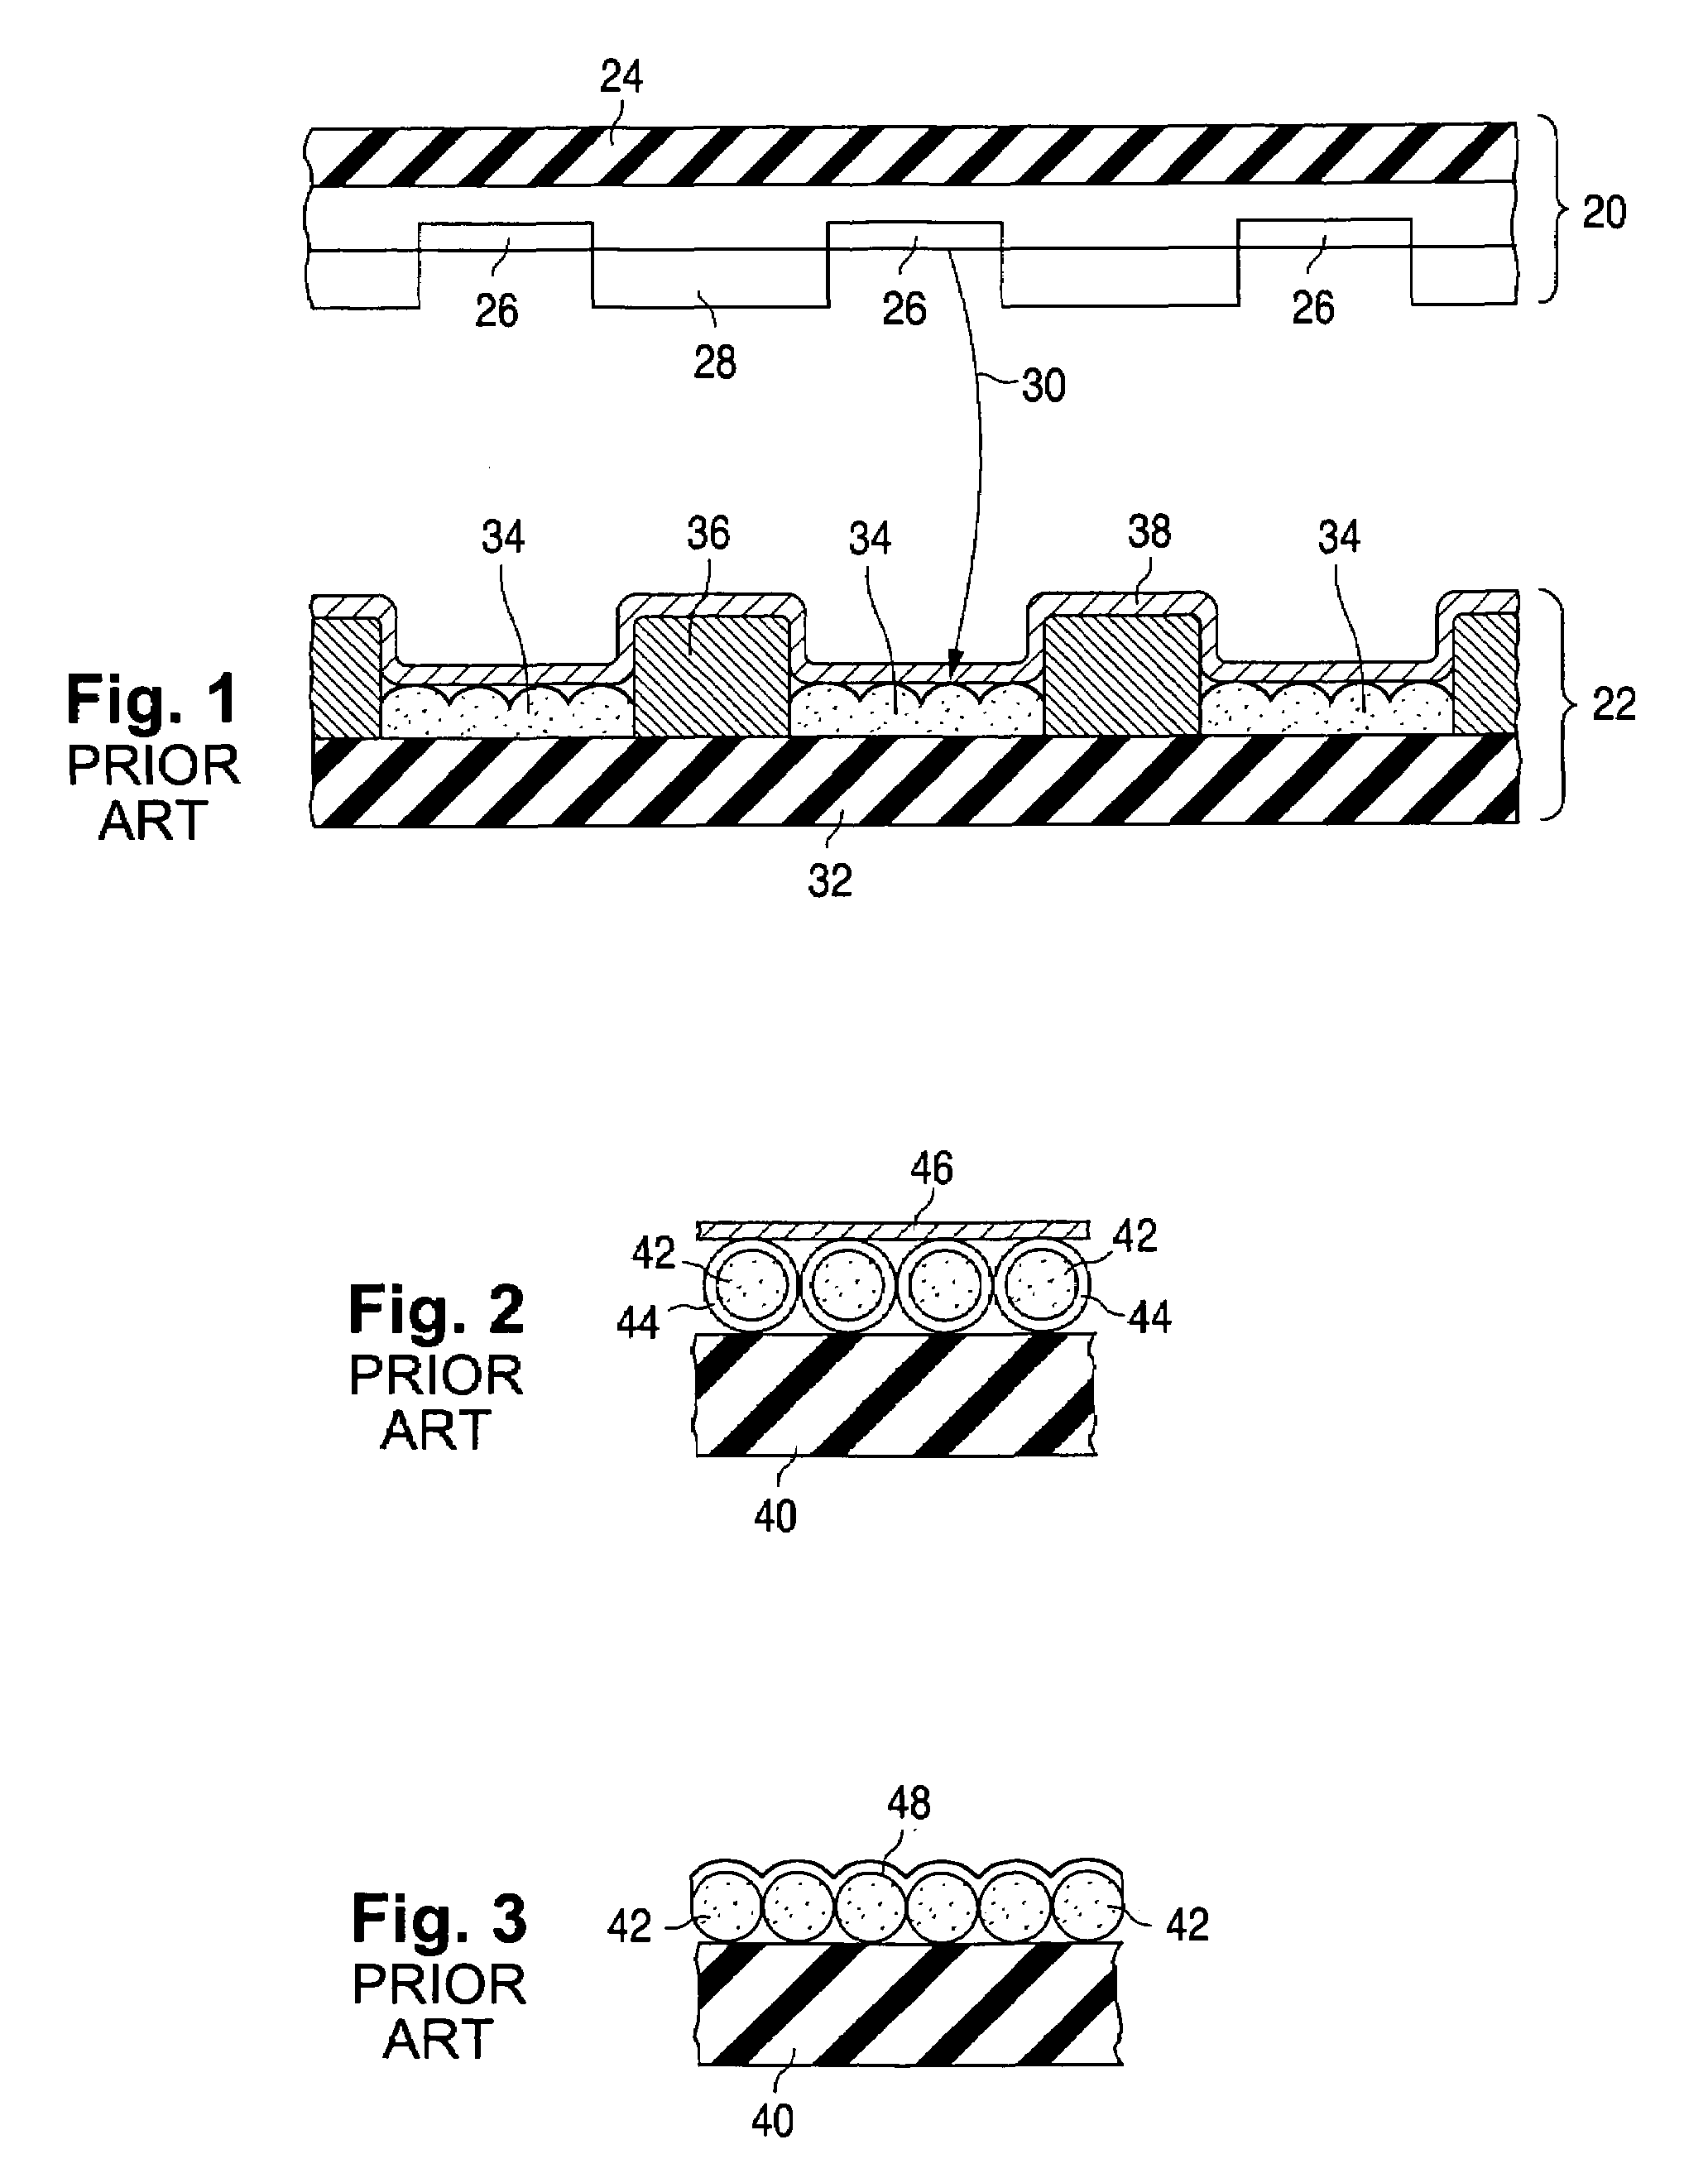 Light-emitting device having light-emissive particles partially coated with intensity-enhancement material